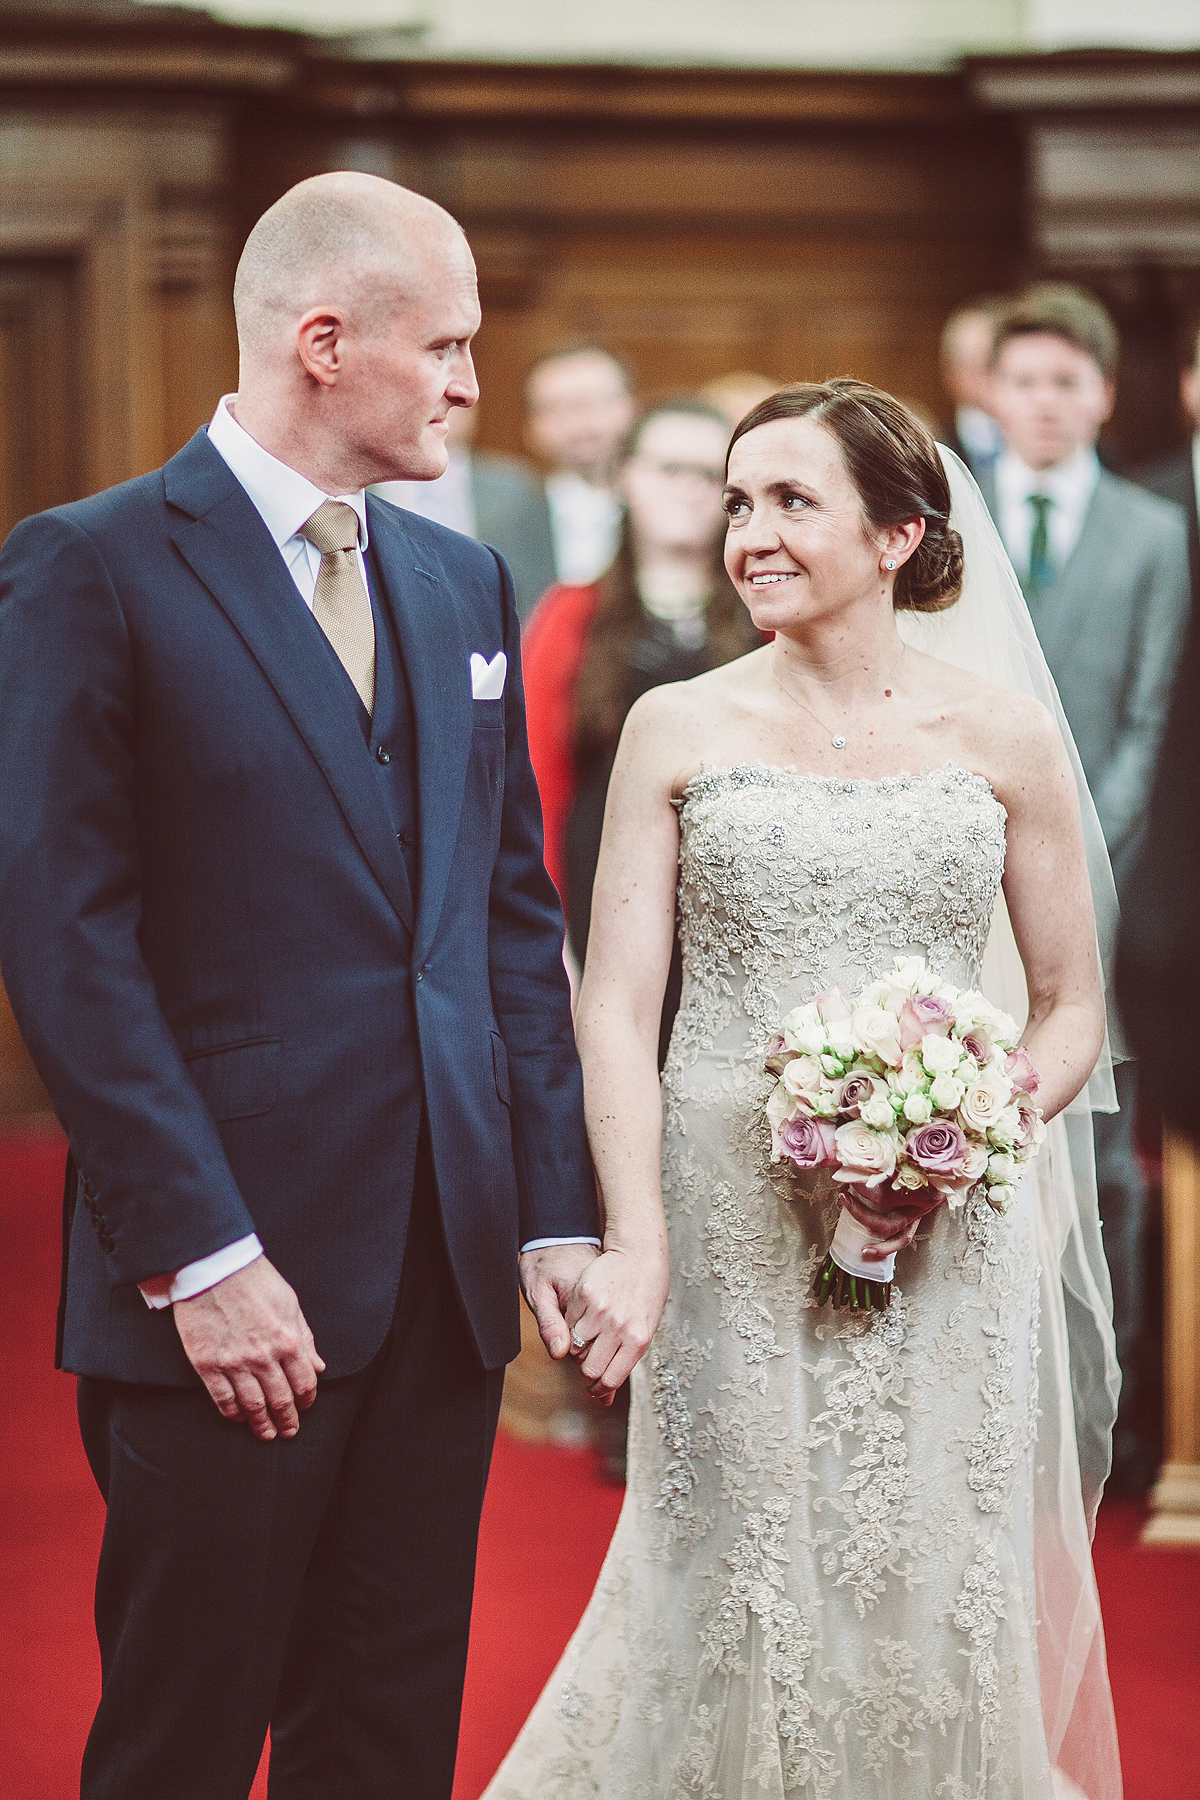 Nicky wore a Justin Alexander gown for her relaxed and stylish winter wedding in East London. Photography by Lemonade Pictures.